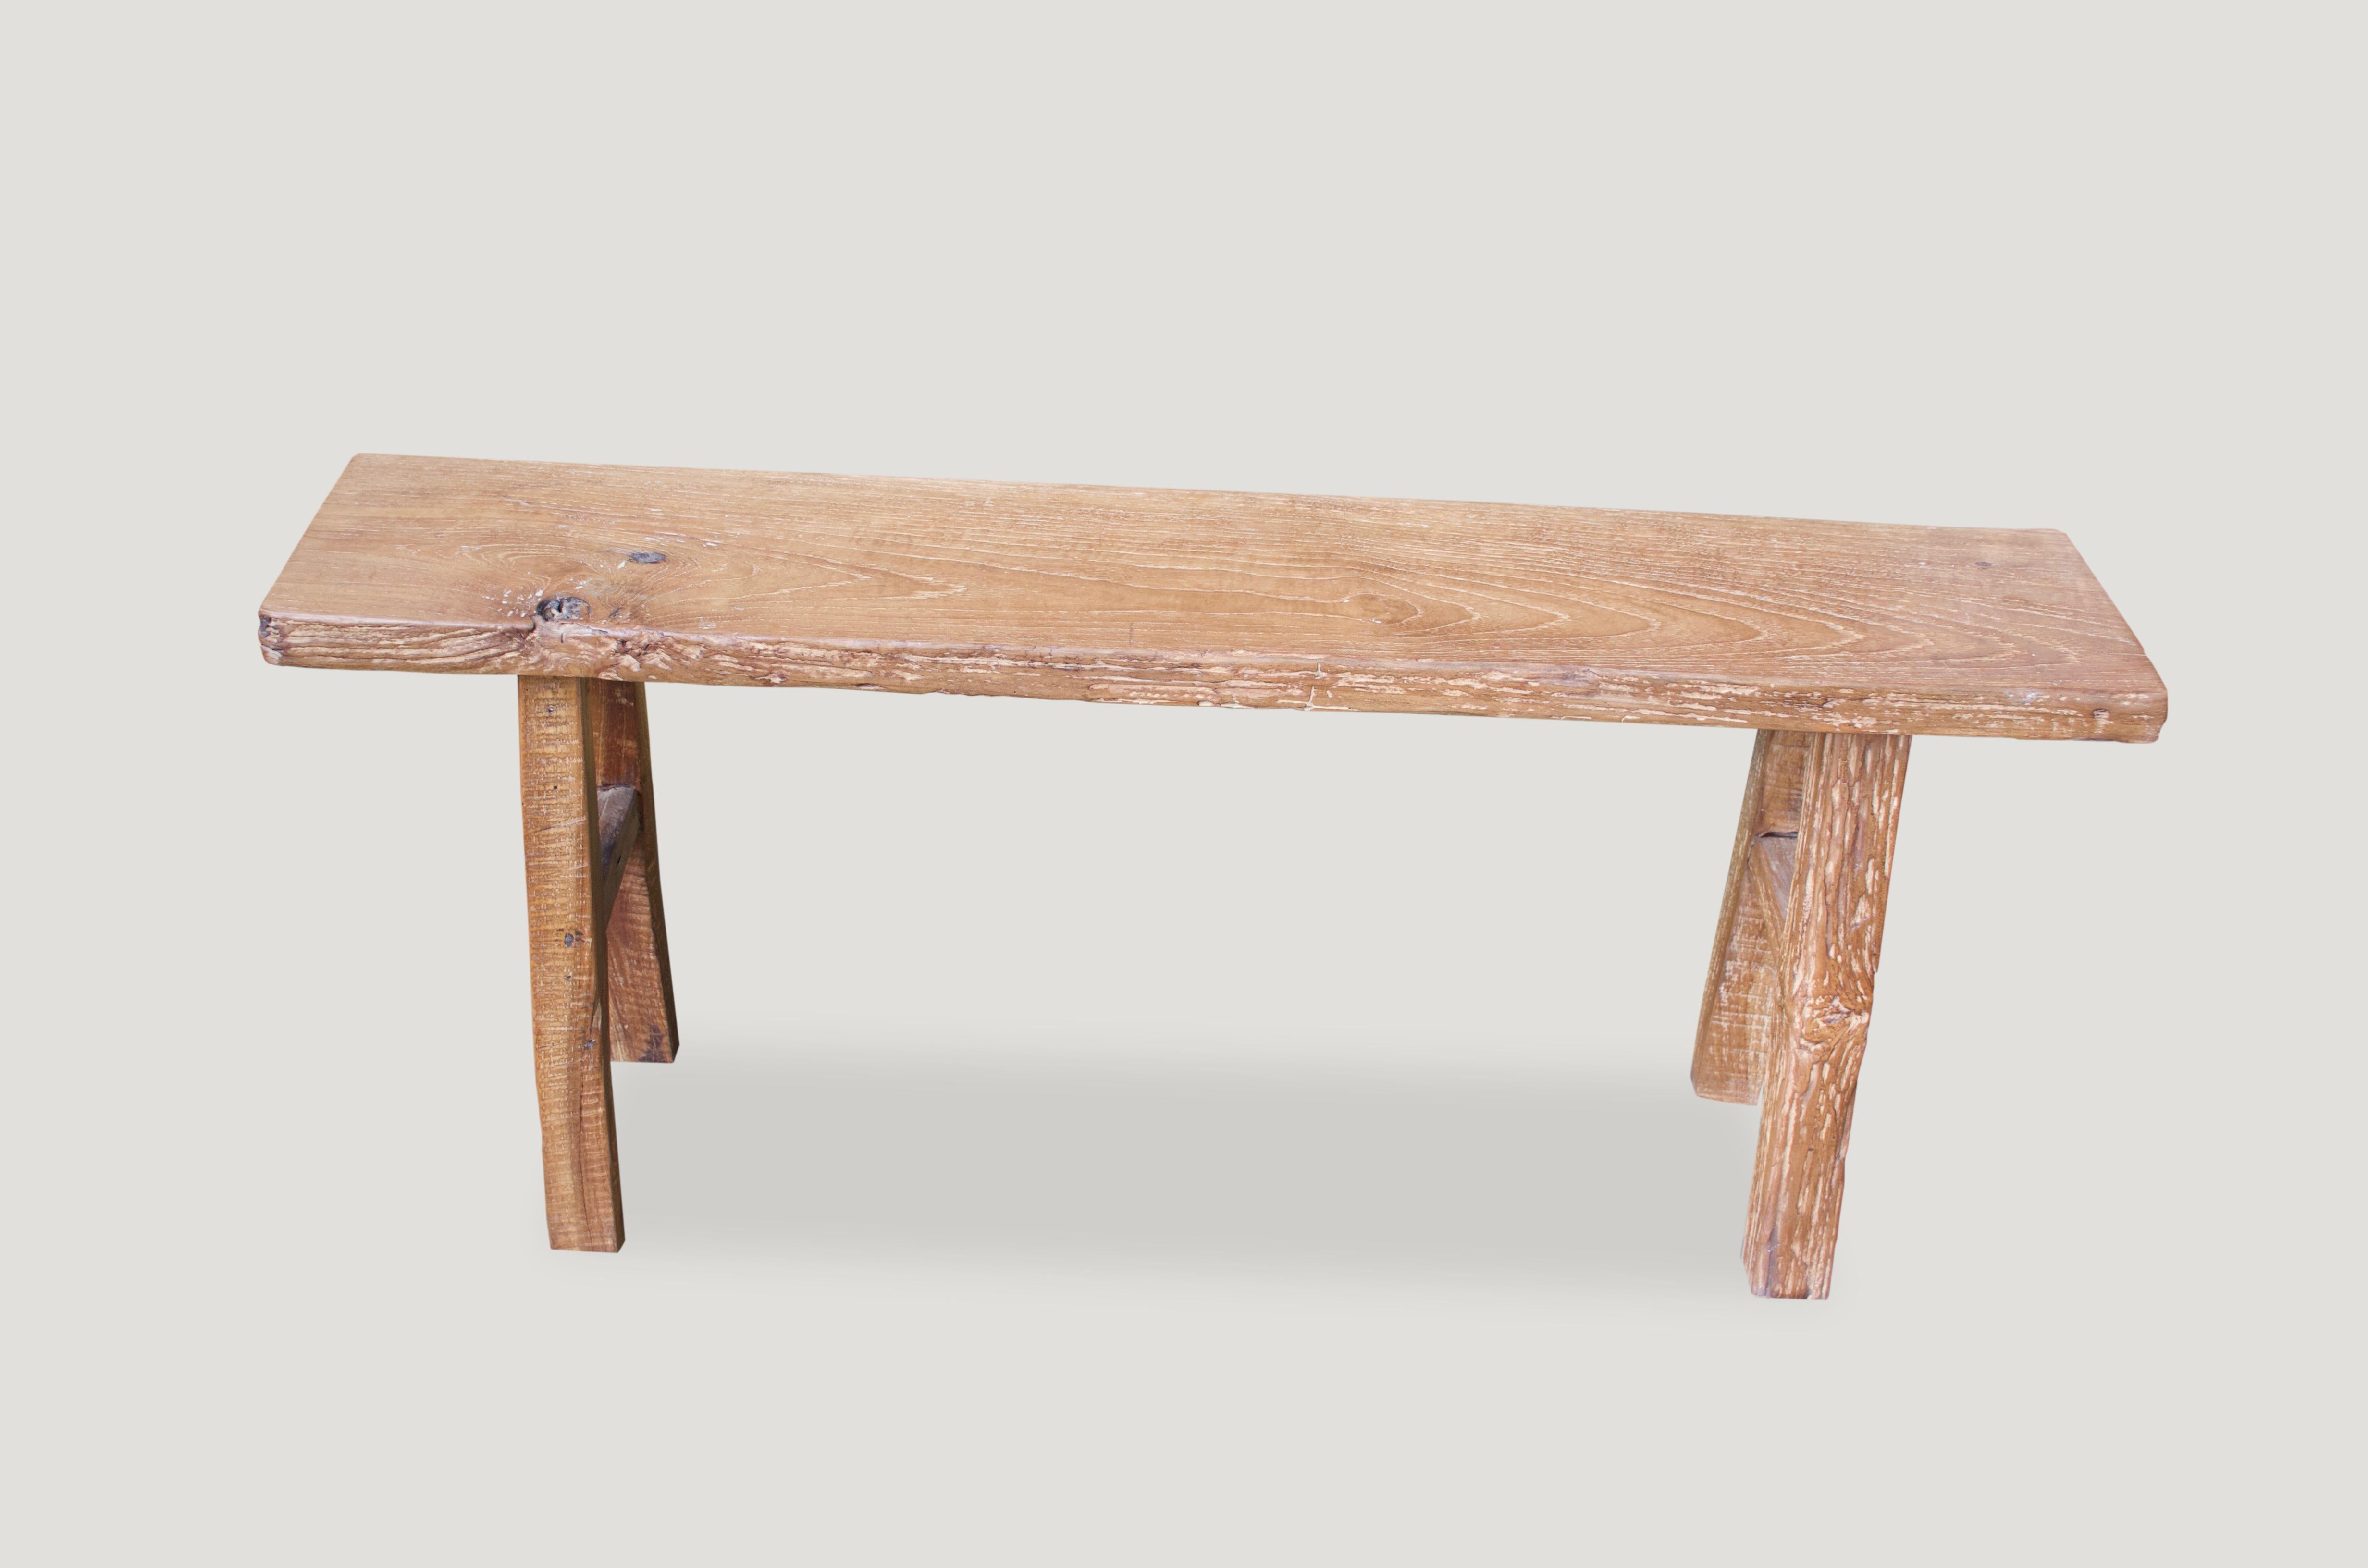 Antique bench. Perfect for inside or outside living.

This bench was sourced in the spirit of wabi-sabi, a Japanese philosophy that beauty can be found in imperfection and impermanence. It’s a beauty of things modest and humble. It’s a beauty of